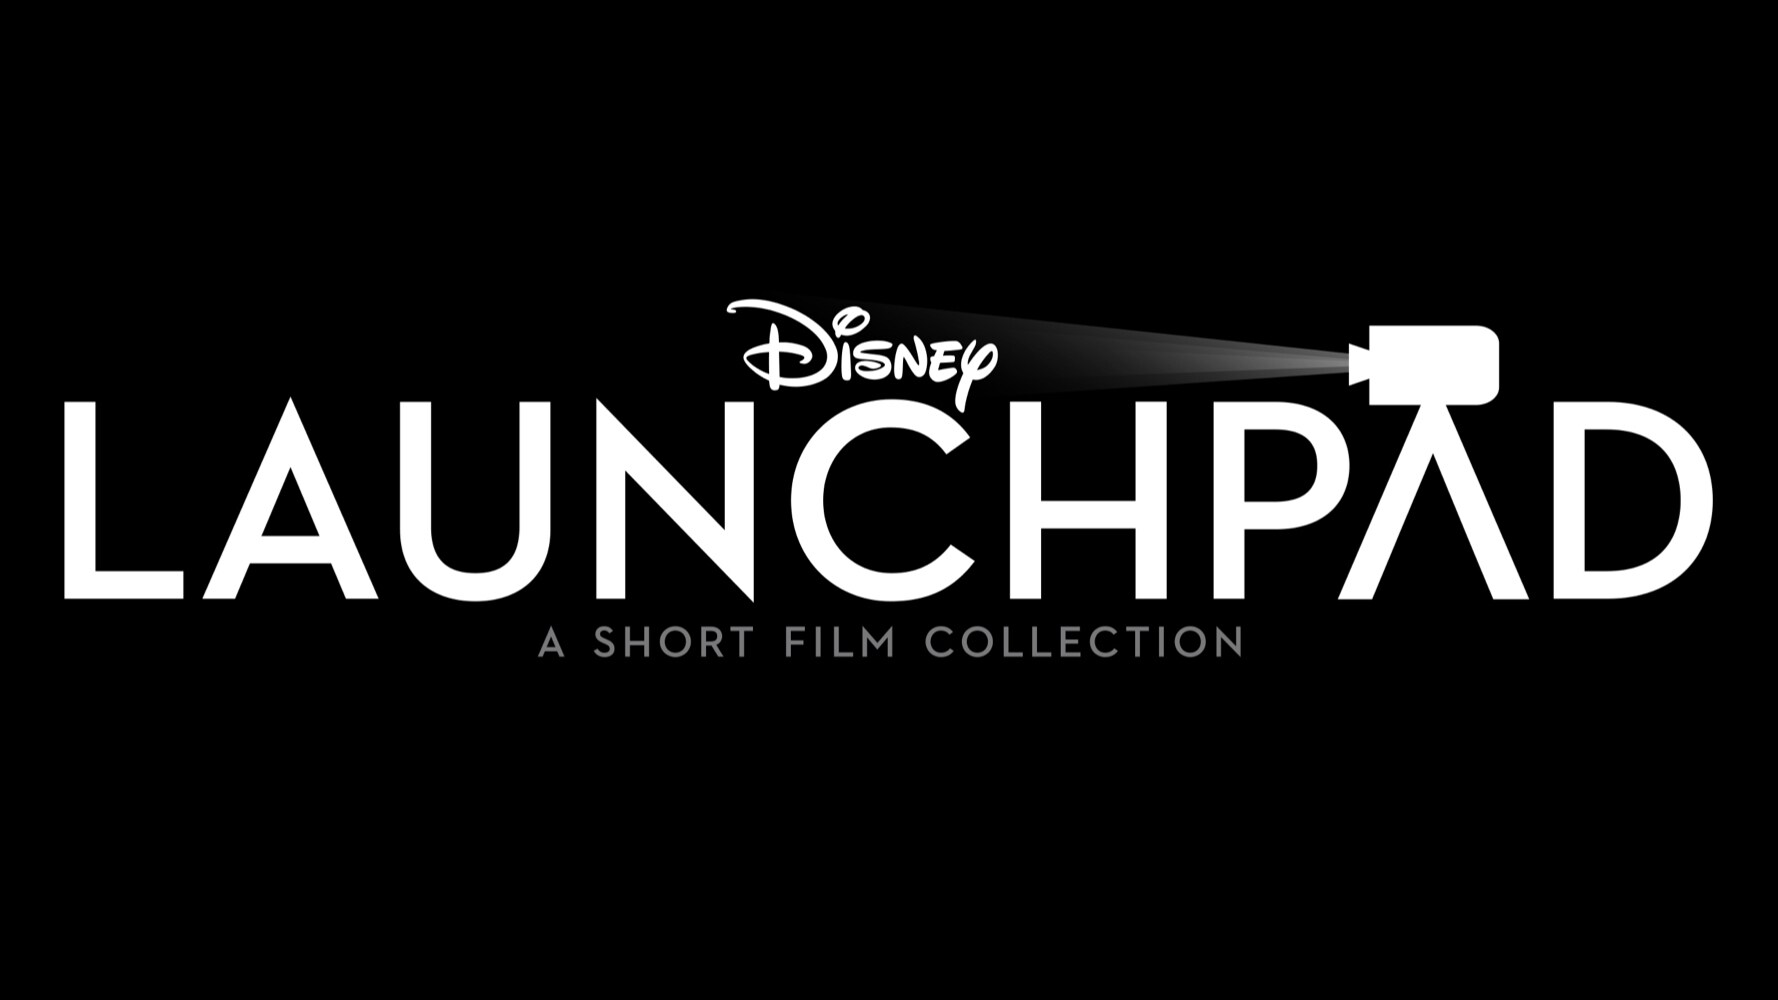 Disney+ Releases New Featurette, “Embrace Yourself,” For Season One Of Disney’s Inaugural “Launchpad” Collection Of Short Films